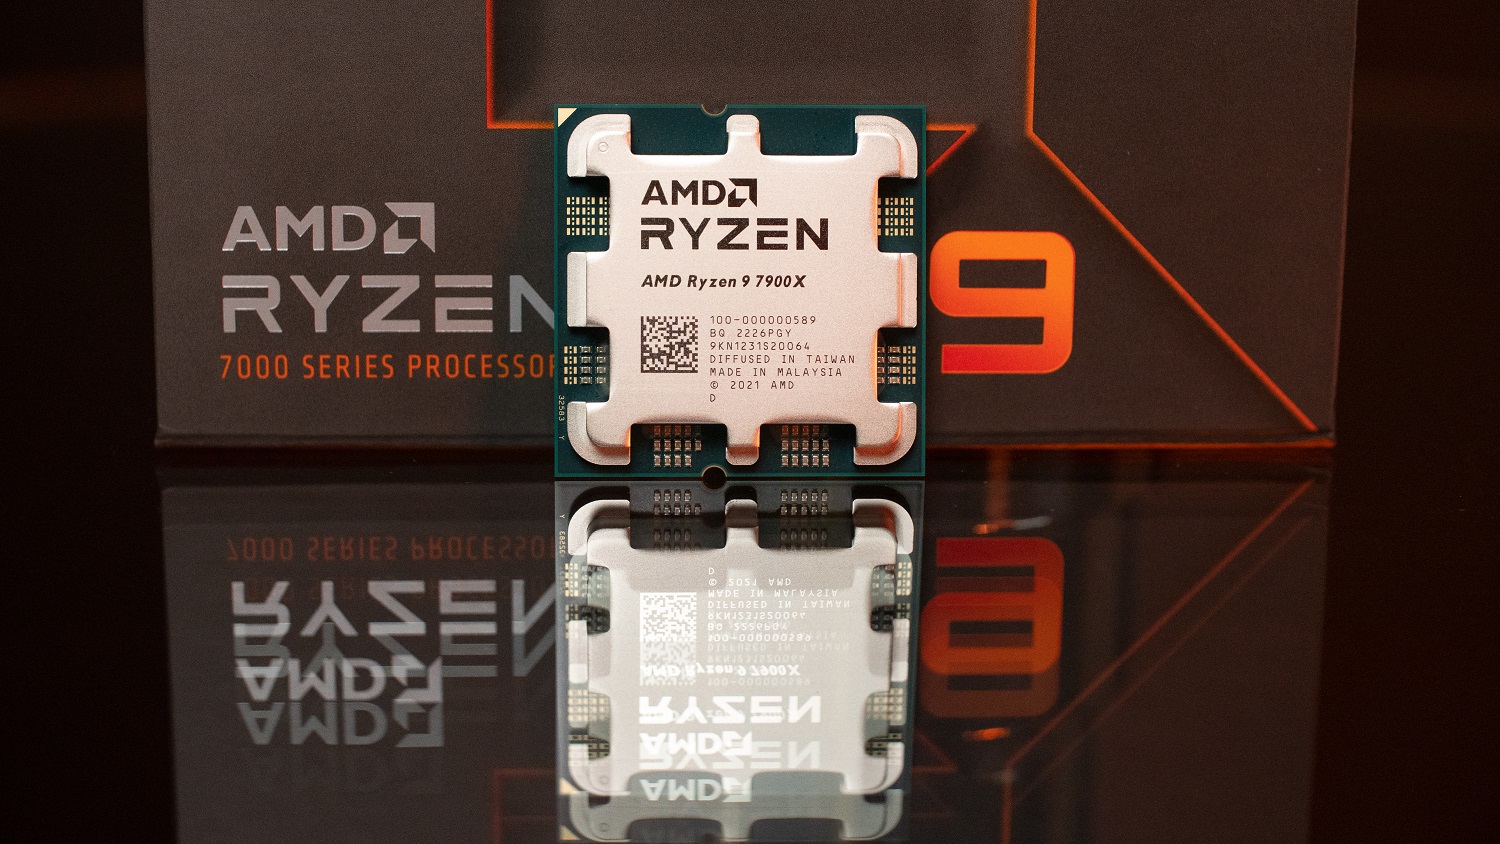 AMD's Ryzen 7 5800X reached a new pricing low - OC3D